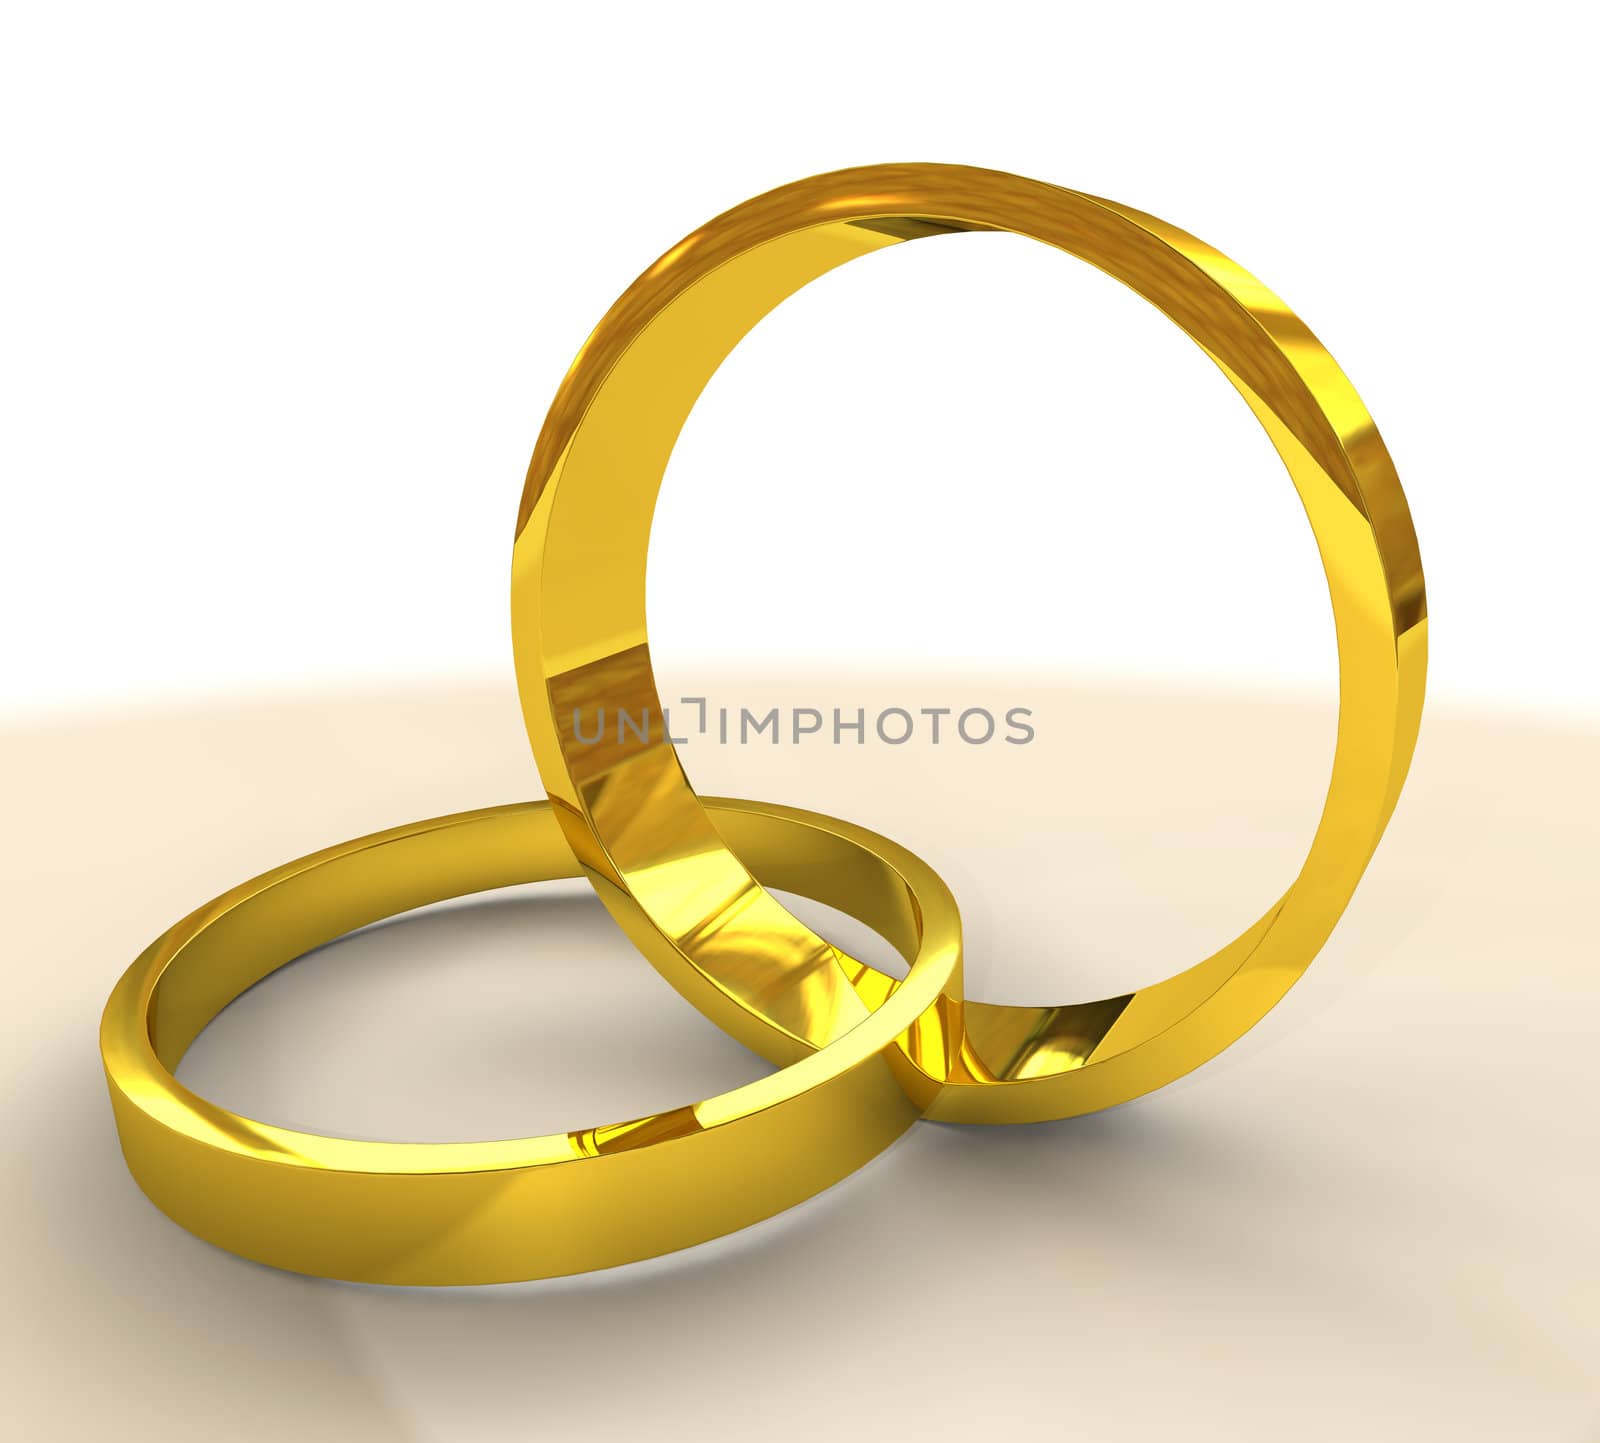 Pair of golden wedding bands or rings linked together representing marriage